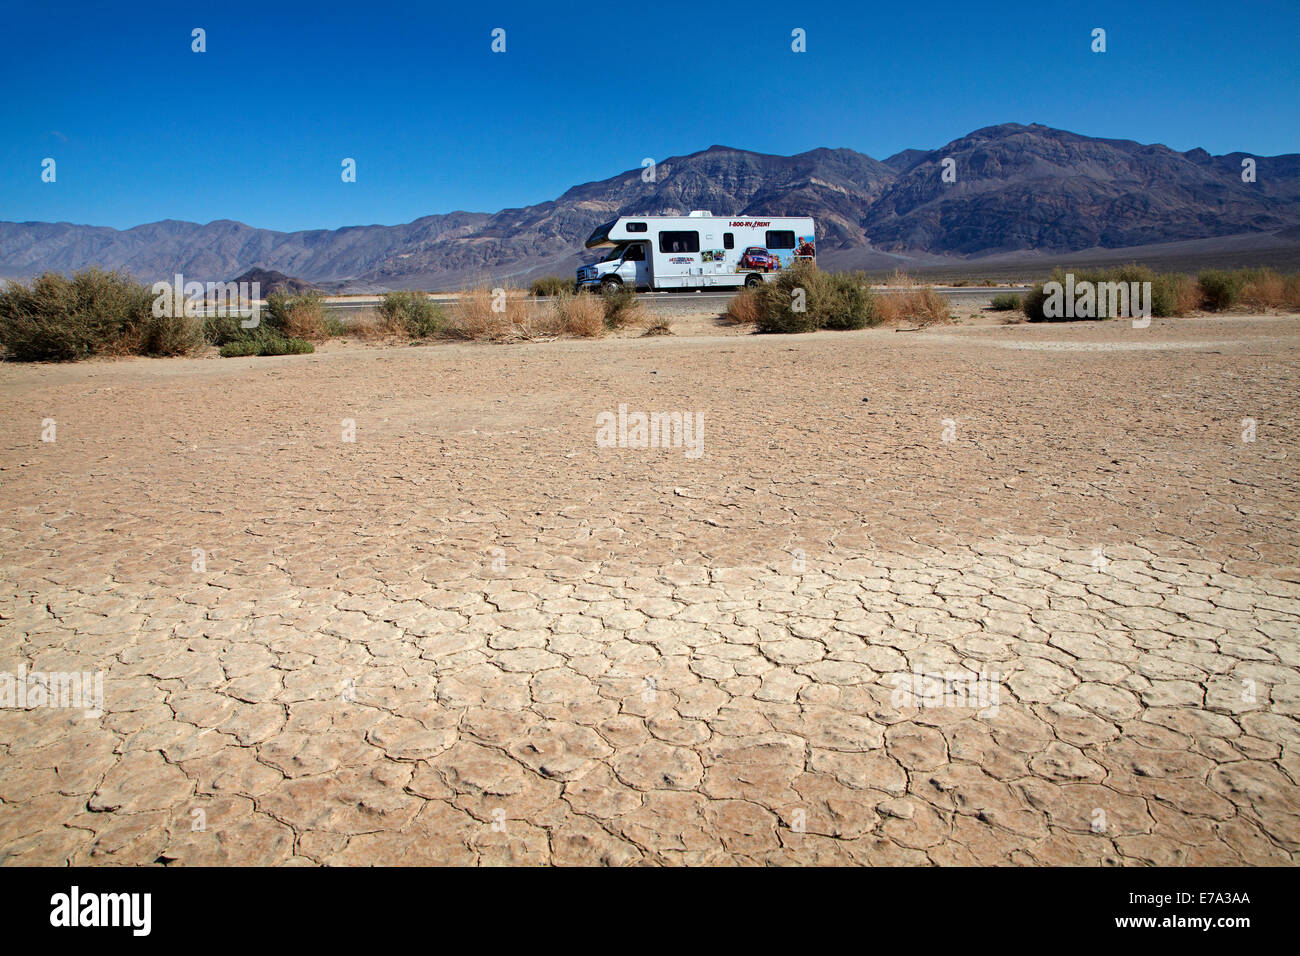 Salt Pan and RV, Panamint Valley, Death Valley National Park, Mojave Desert, California, USA Stock Photo